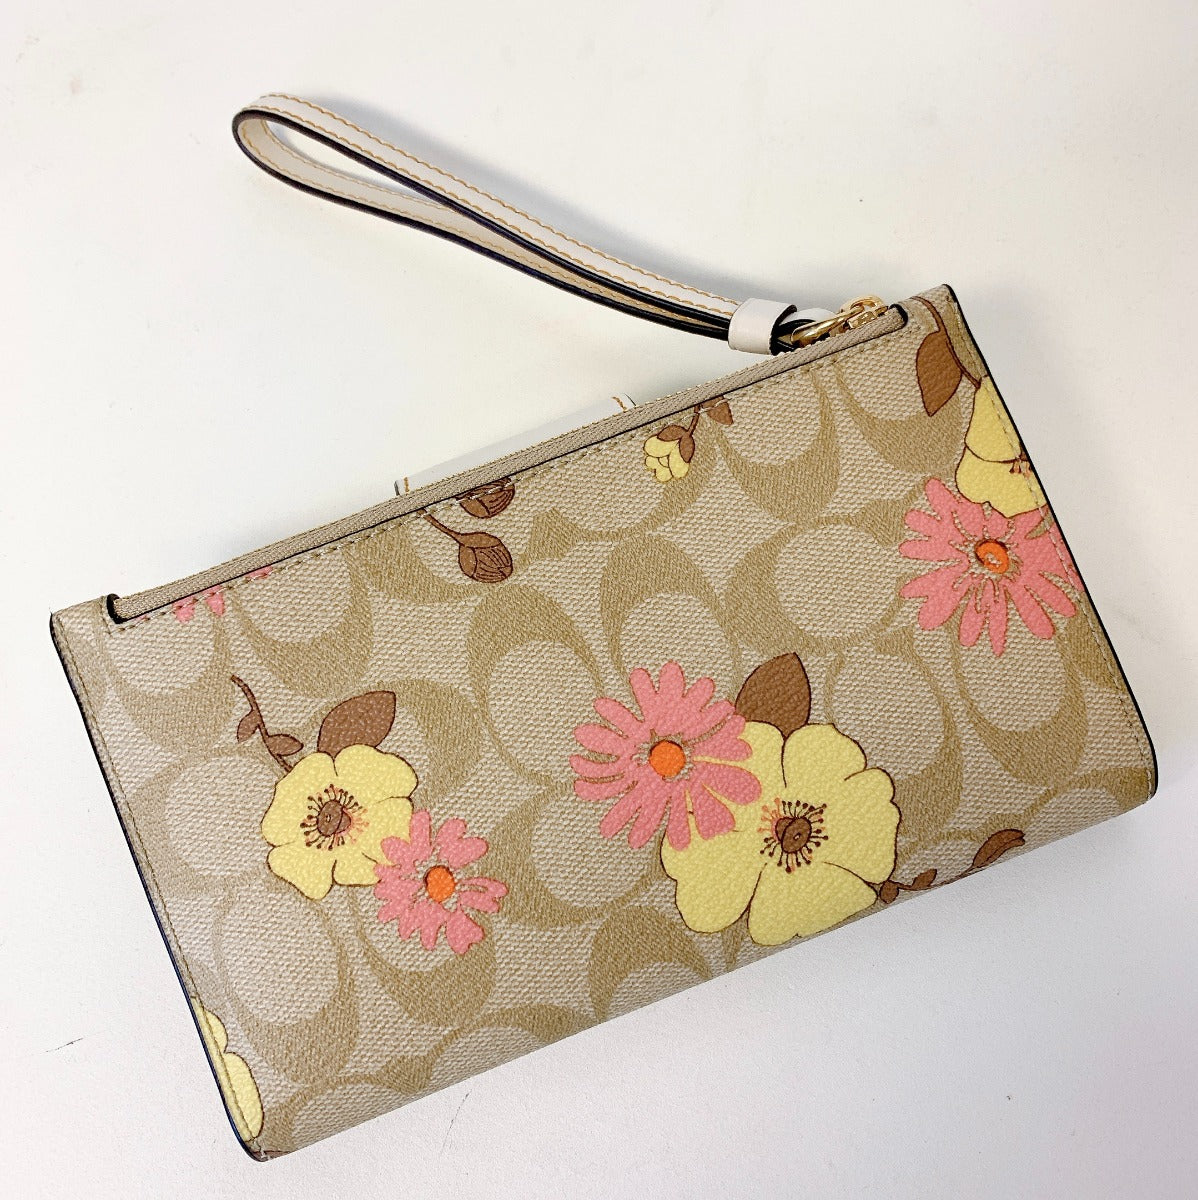 Coach CH720 Tech Wallet In Signature Canvas With Floral Cluster Print IN Light Khaki Multi